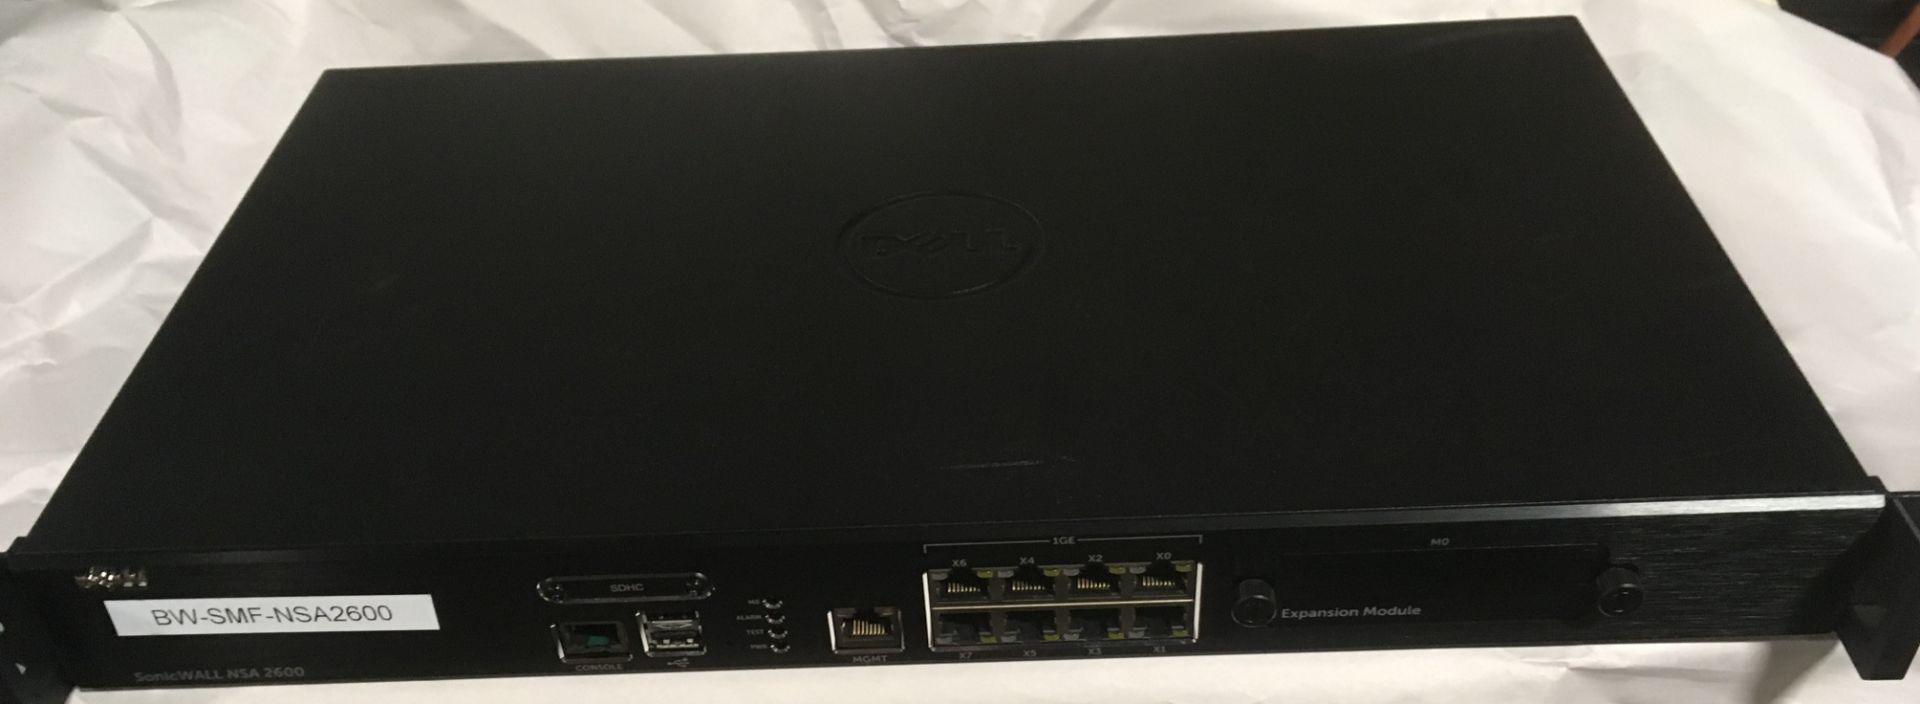 Dell Sonicwall NSA 2600 Security Appliance